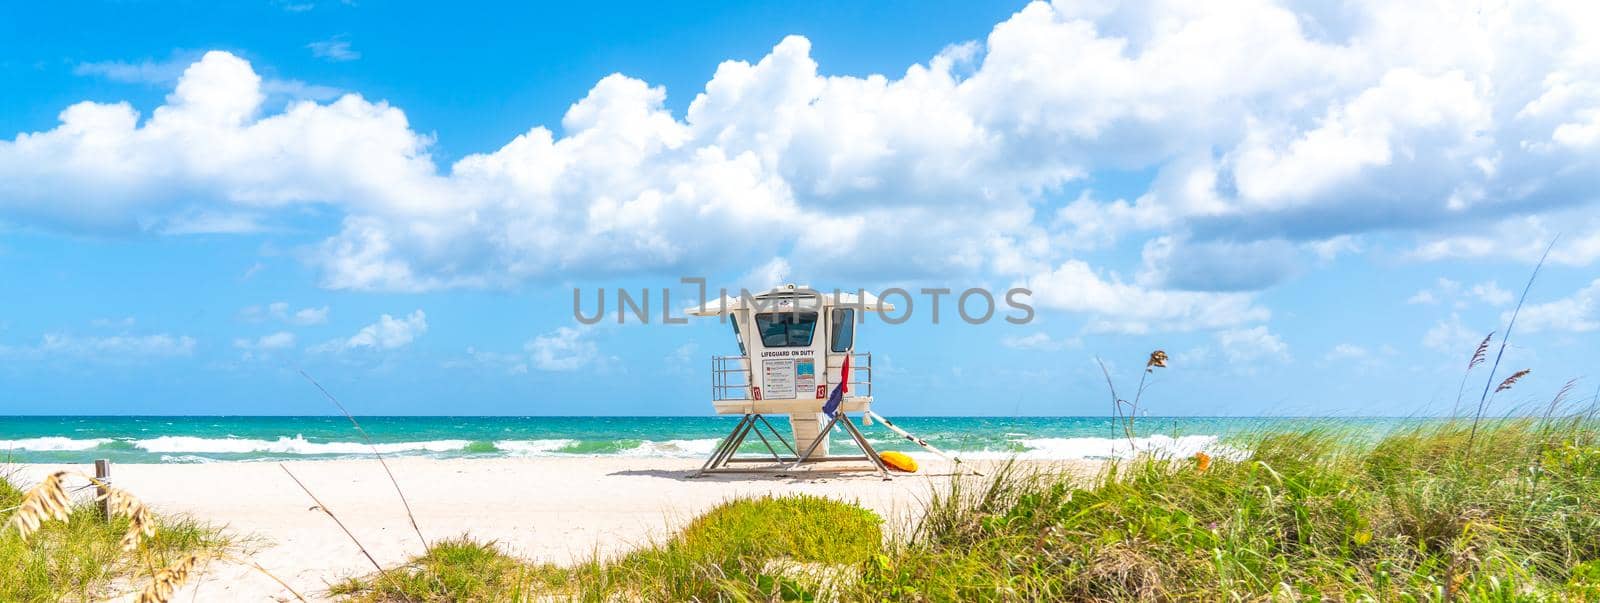 Fort Lauderdale, Florida, USA - September 20, 2019: Seafront beach promenade with palm trees on a sunny day in Fort Lauderdale by Mariakray